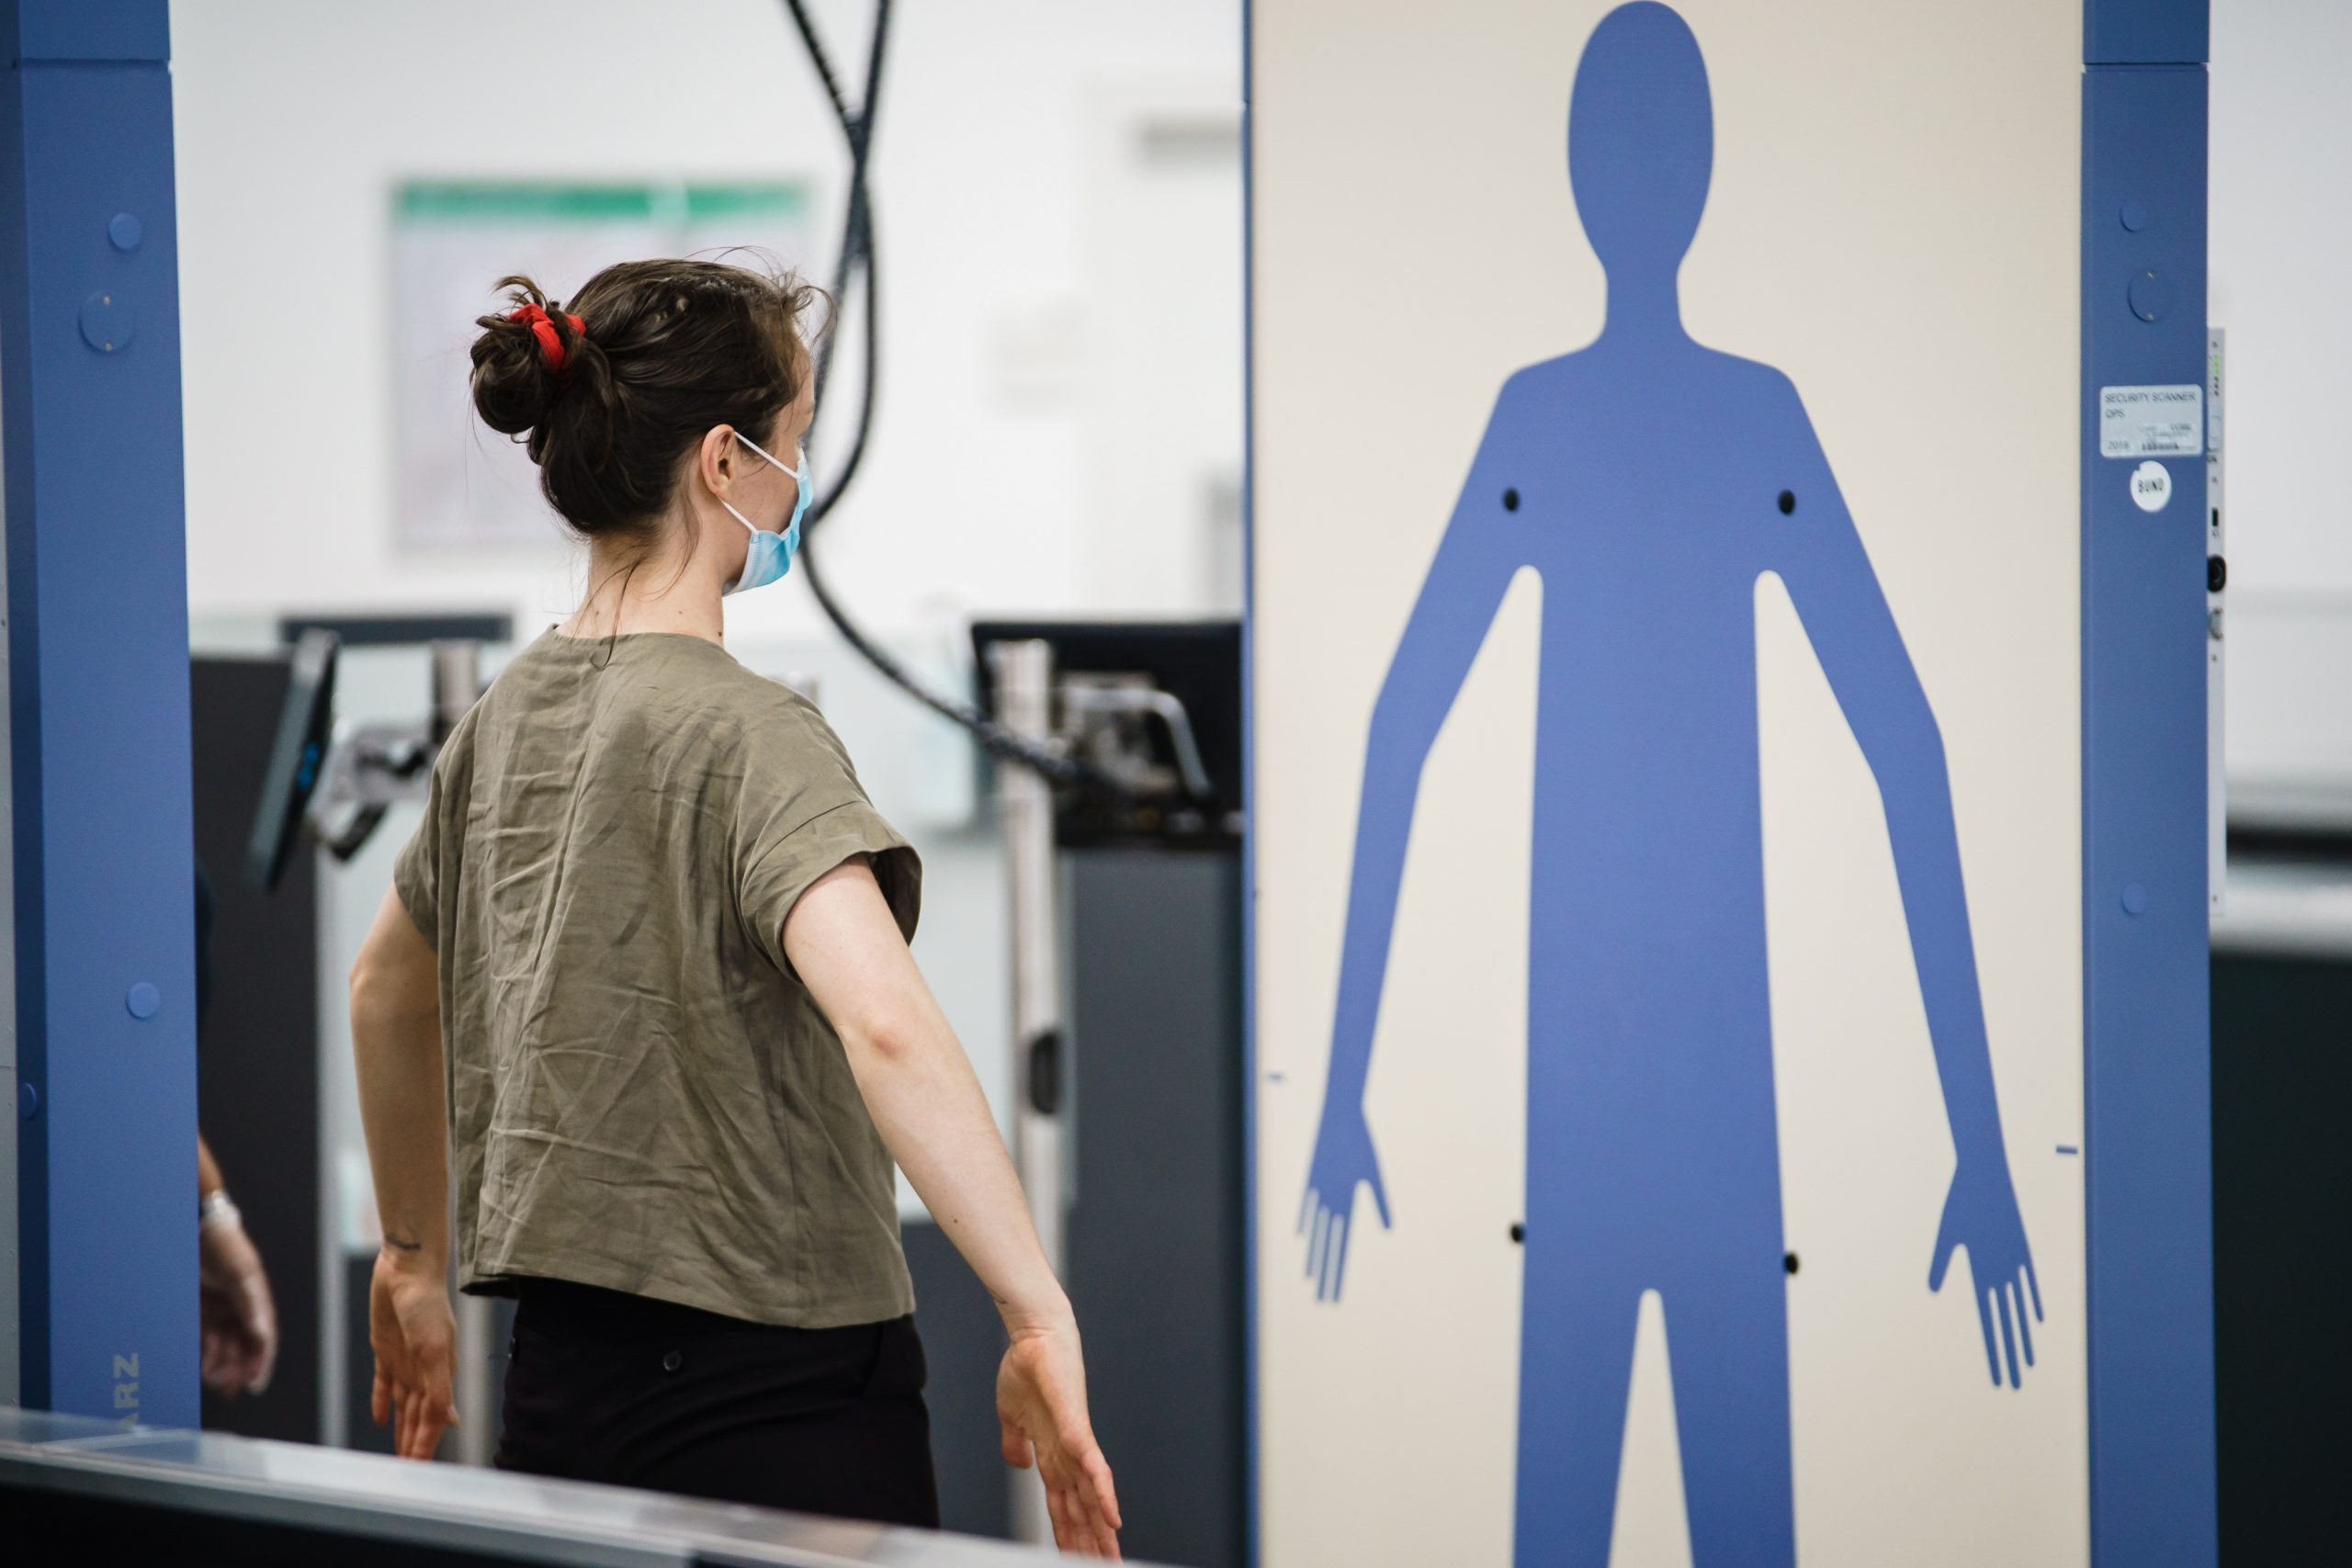 epa08622928 A passenger stands in a body scanner at the security check zone at Berlin-Schoenefeld airport during a press tour in Schoenefeld, Germany, 24 August 2020. The company Airport Berlin Brandenburg invited the press for a tour of Schoenefeld airport. The terminal T5 becomes part of the soon to be opened BER airport. The opening of BER airport is scheduled for 31 October 2020.  EPA/CLEMENS BILAN